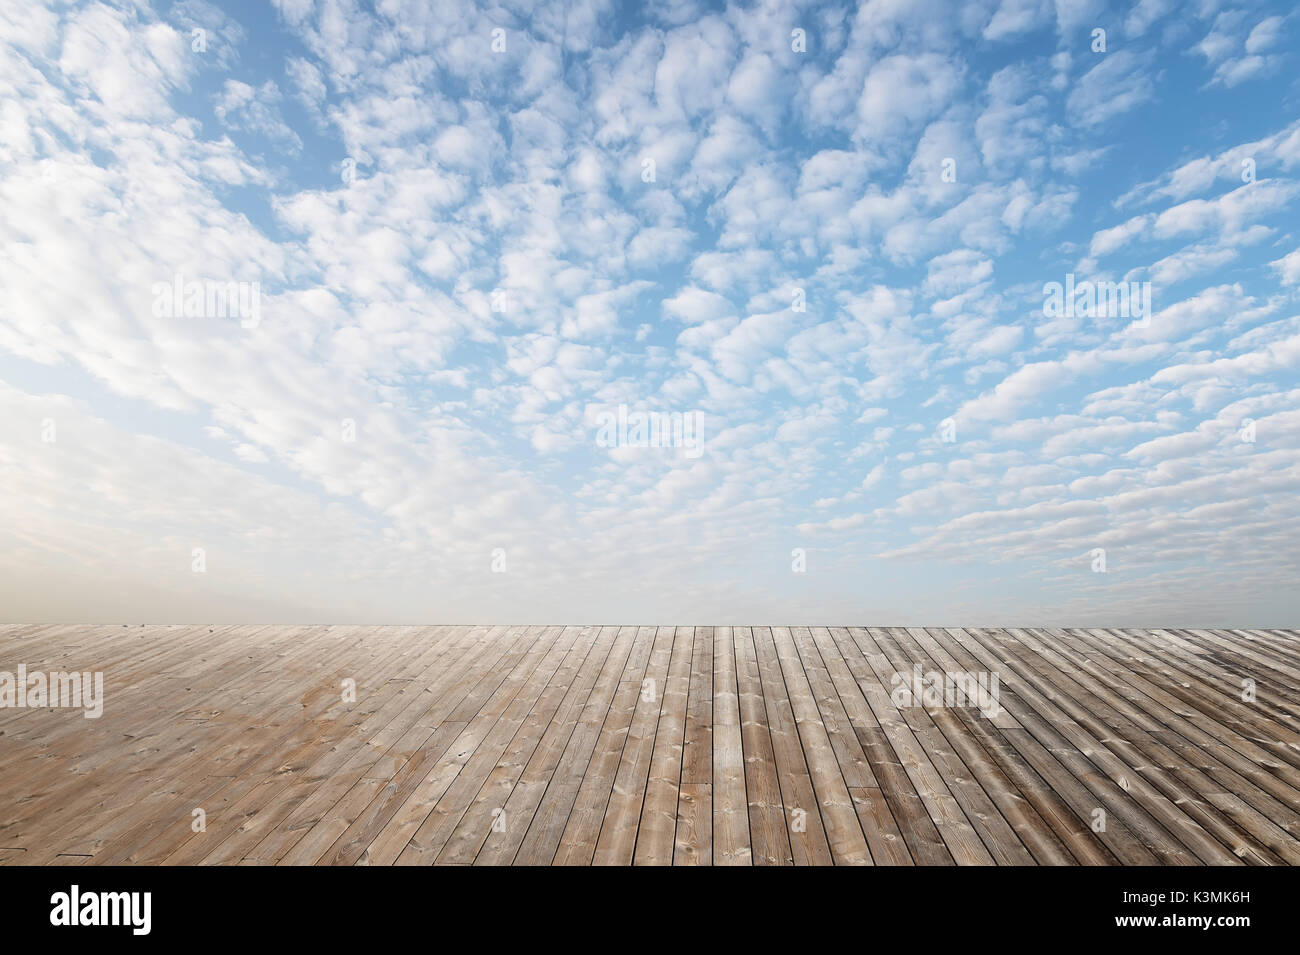 Sky background with white wood floor Stock Photo